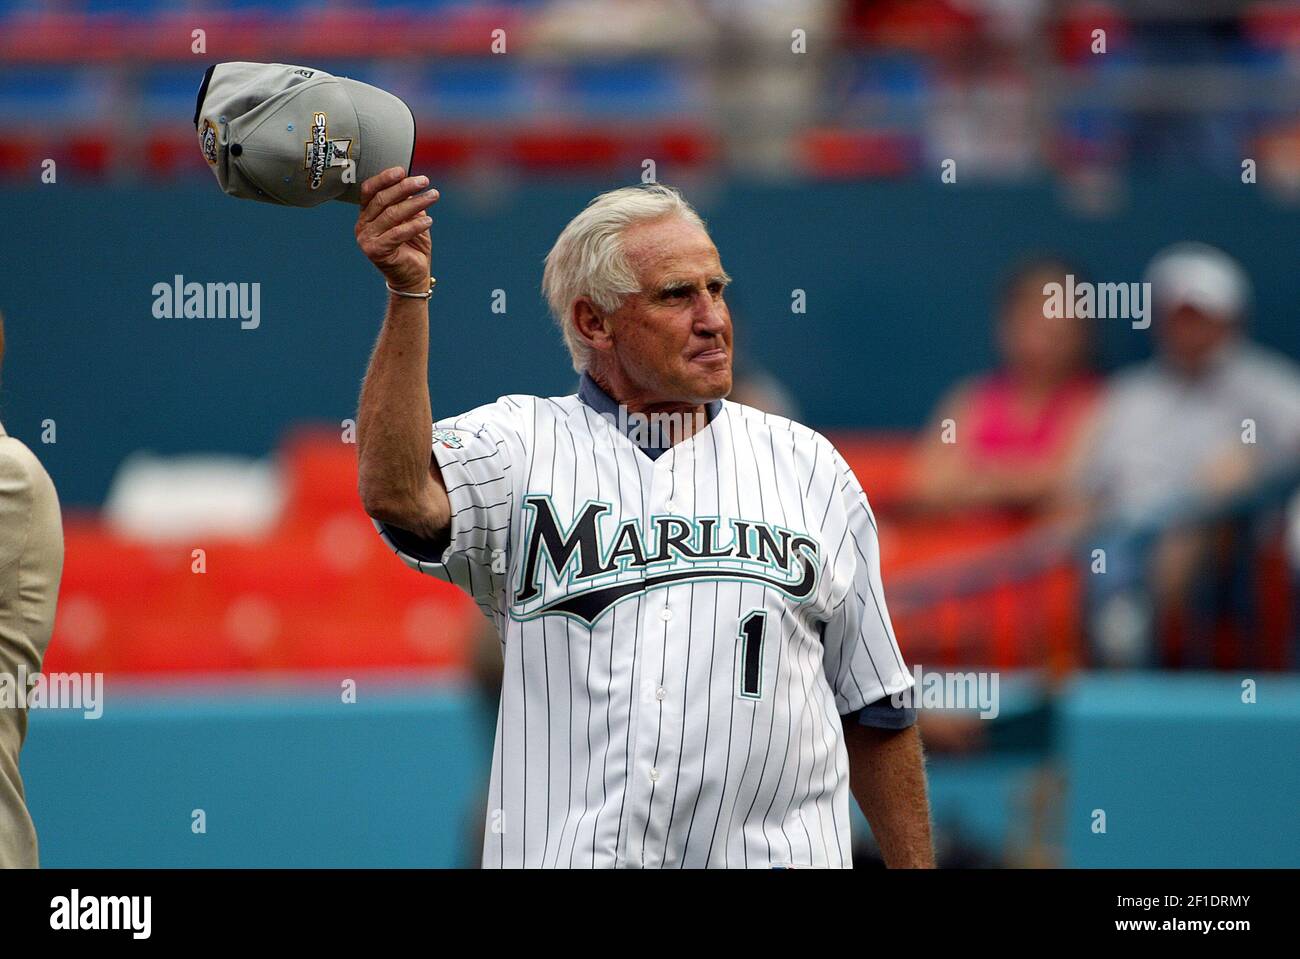 The Florida Marlins host the Houston Astros at Pro Player Stadium in Miami on May 18, 2004. Former Miami Dolphins coach Don Shula with a Marlins jersey is introduced to fans before game. (Photo by Joe Rimkus Jr./Miami Herald/TNS/Sipa USA) Stock Photo